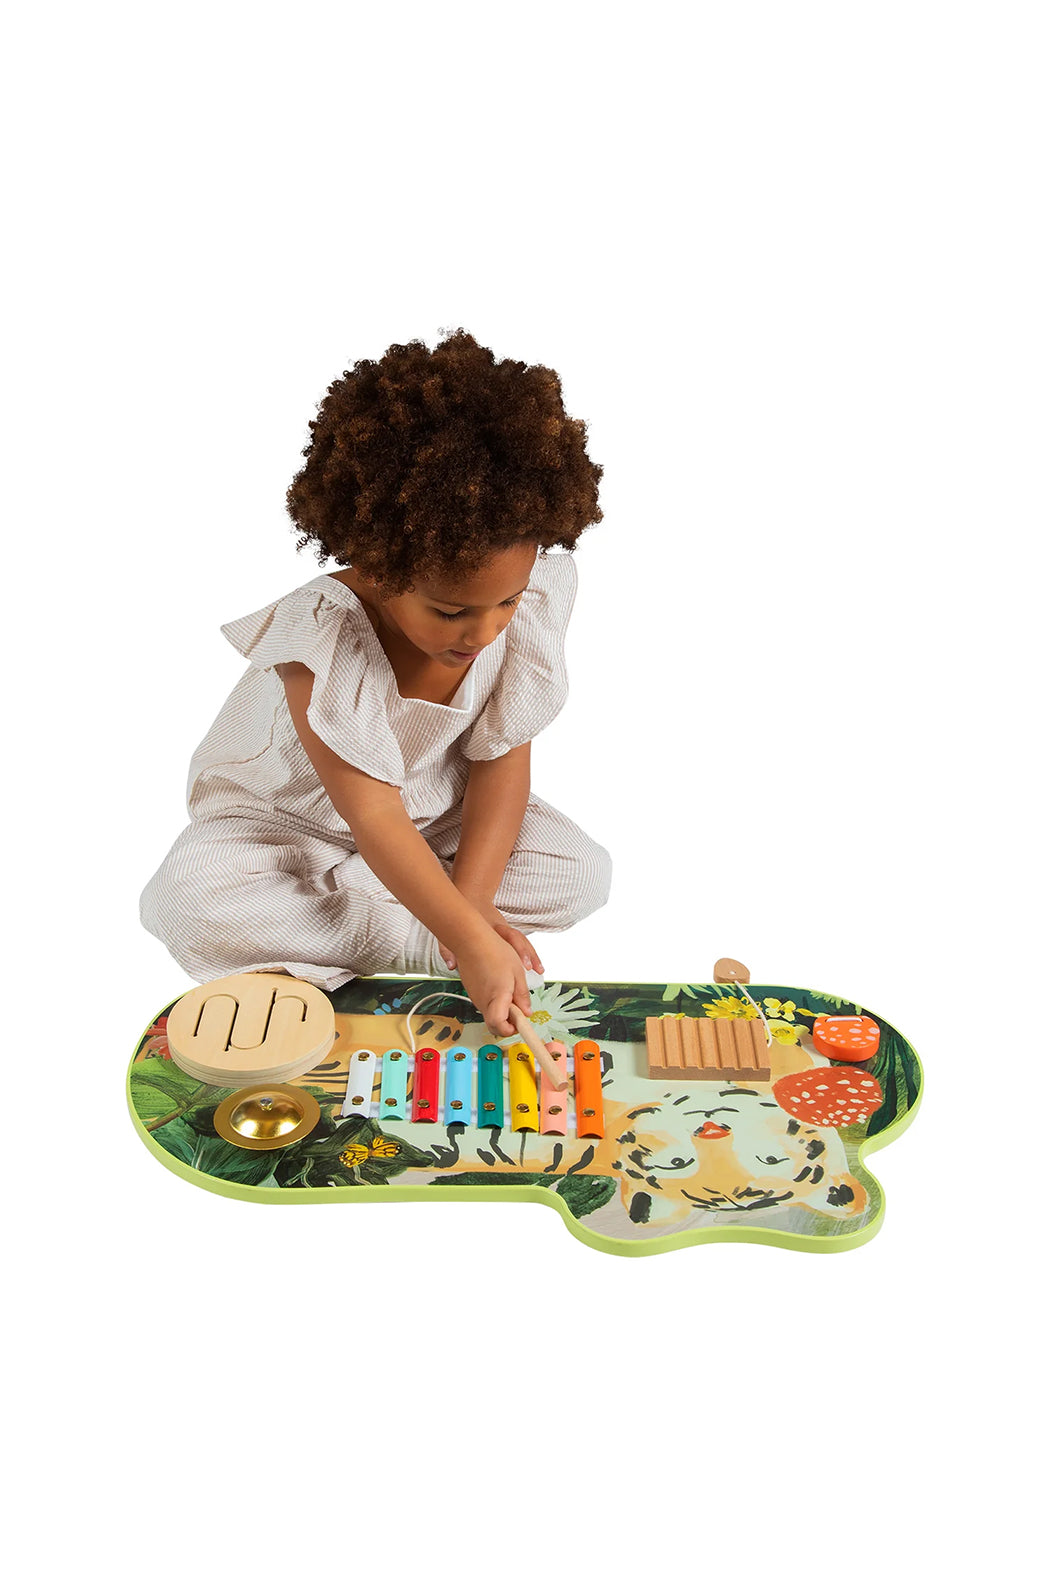 Manhattan Toy Company Tiger Tunes Wooden Activity Toy